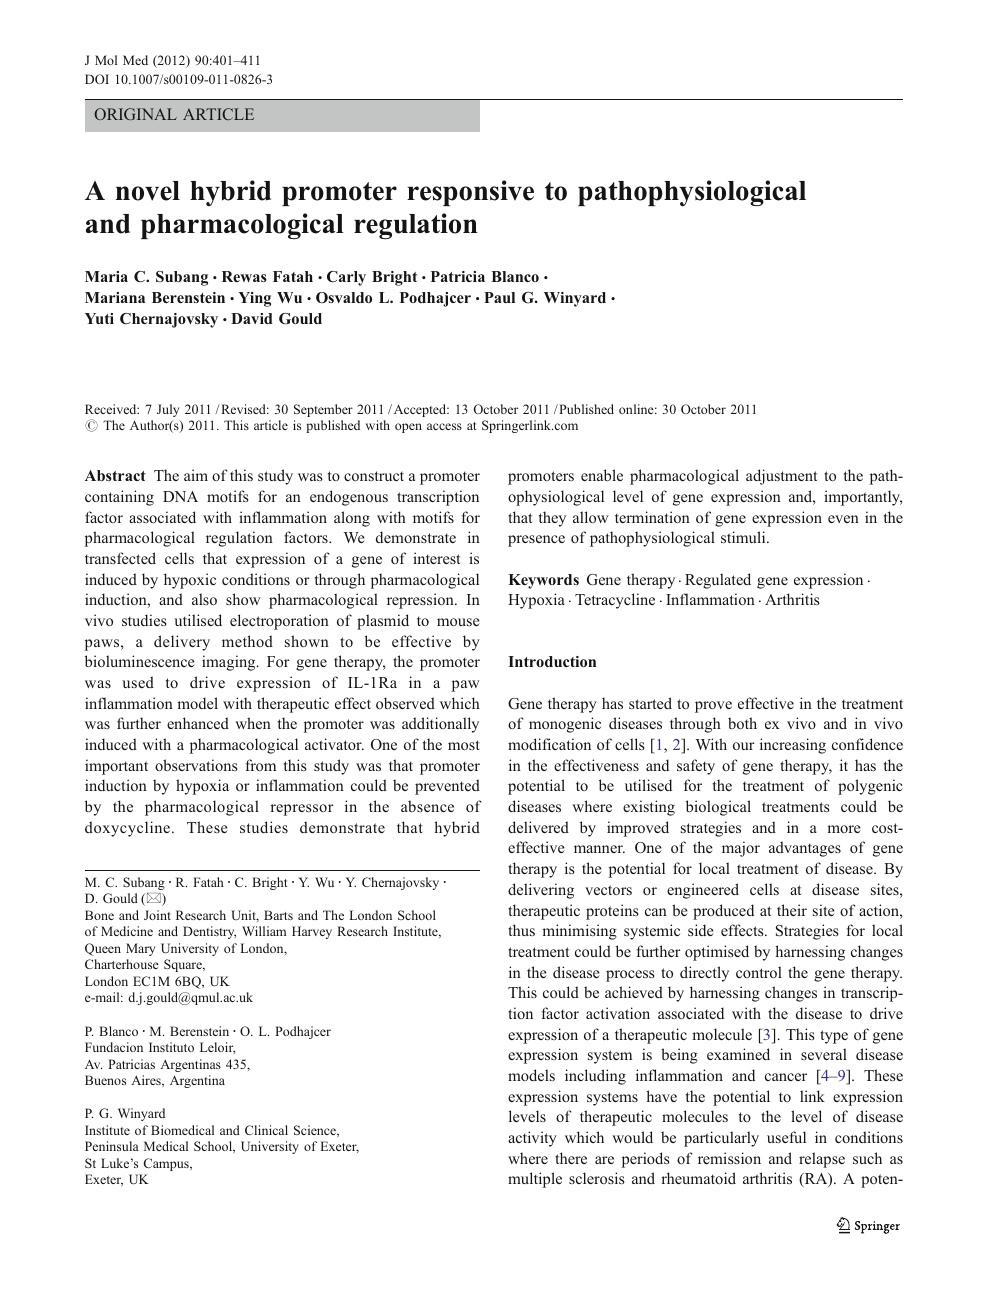 A Novel Hybrid Promoter Responsive To Pathophysiological And Pharmacological Regulation Topic Of Research Paper In Biological Sciences Download Scholarly Article Pdf And Read For Free On Cyberleninka Open Science Hub